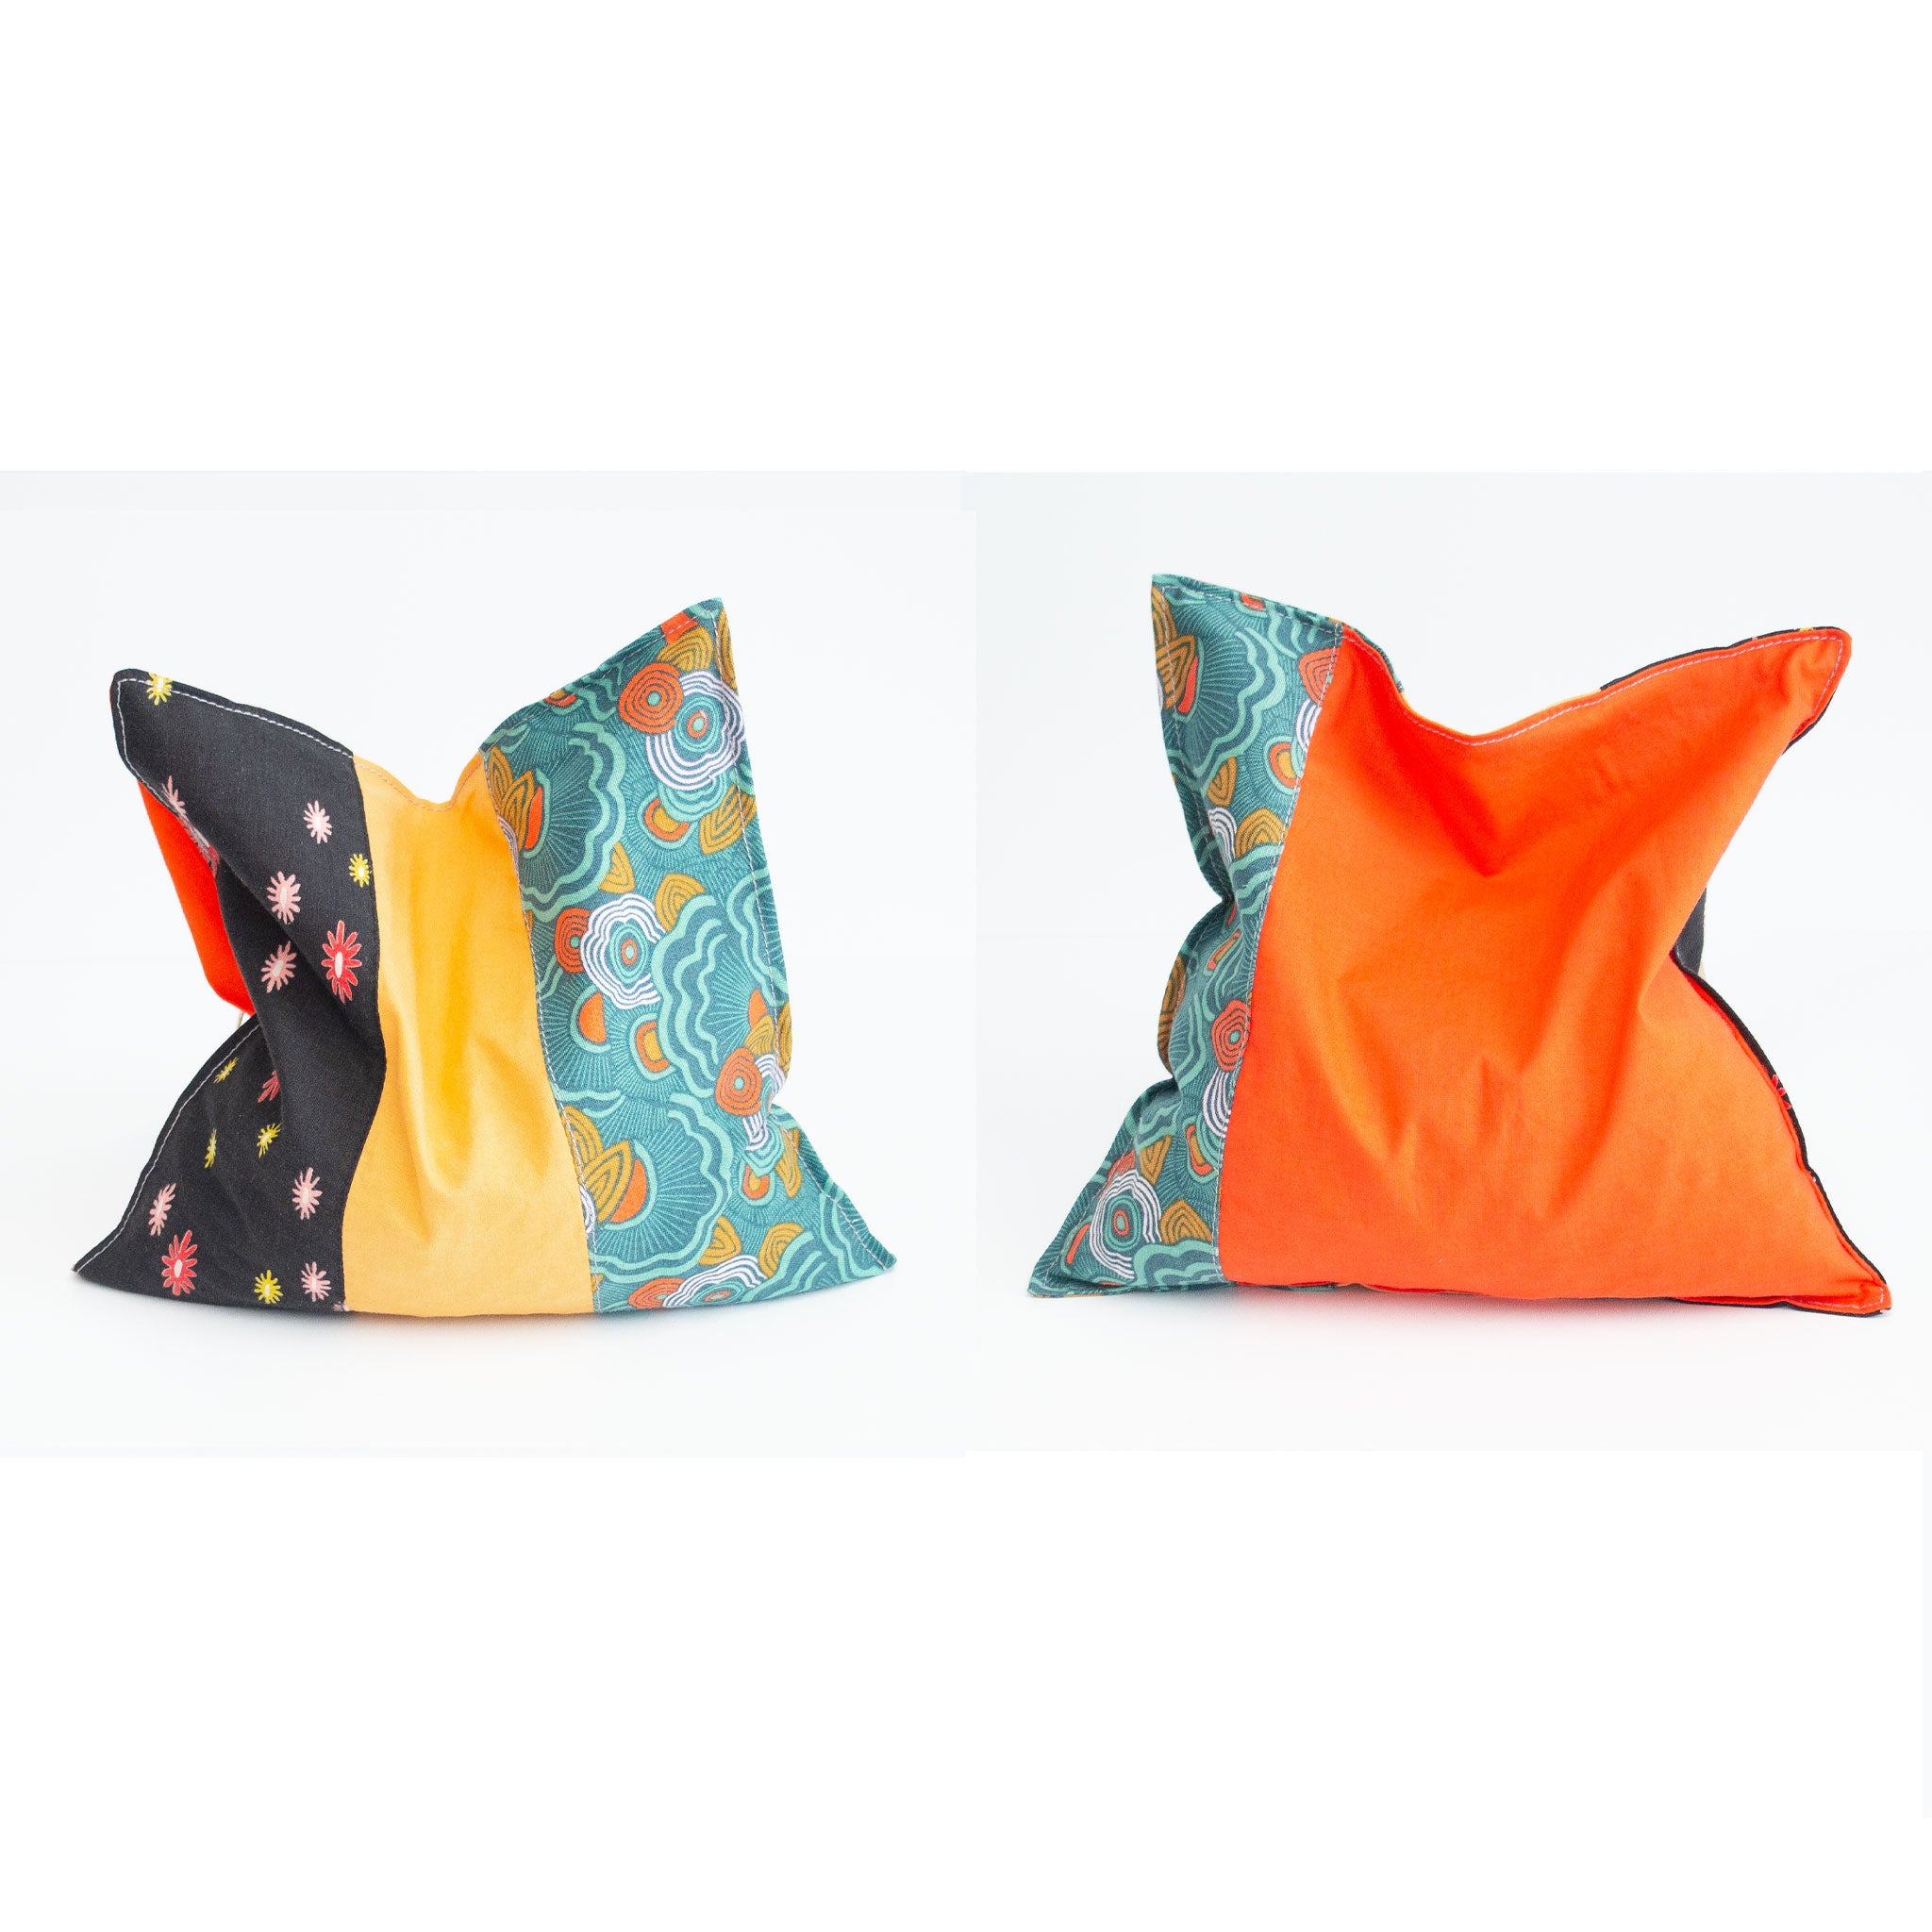 Two grain bags sit side by side showing front and back patchwork patterns. Front and back of patchwork (a mix of floral print, geometric print and solid light and dark orange) rectangle cherry pit grain bag. Sit on white background.